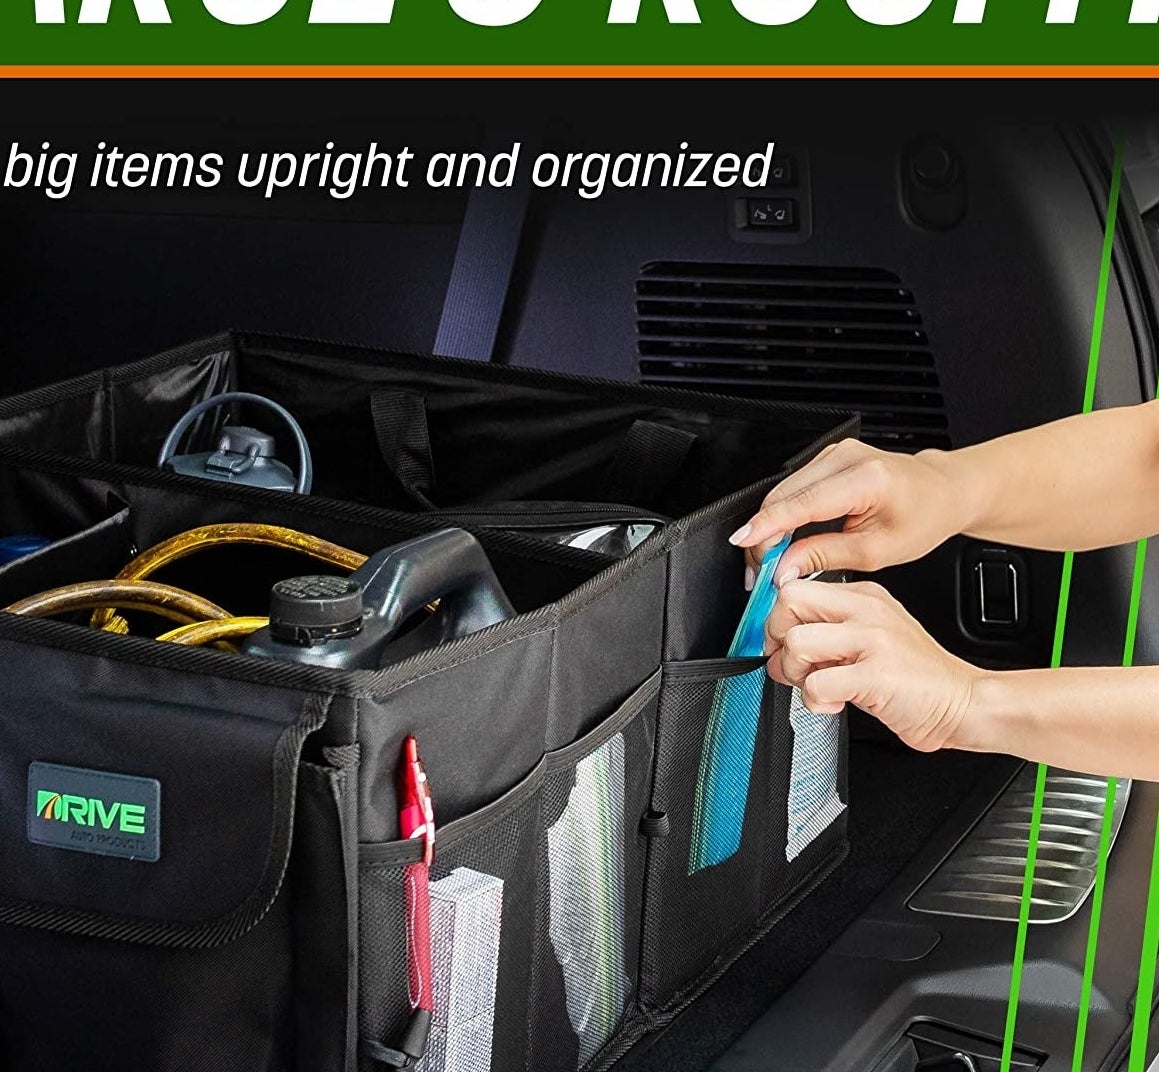 the organizer in a trunk filled with things and someone putting something in one of the pockets